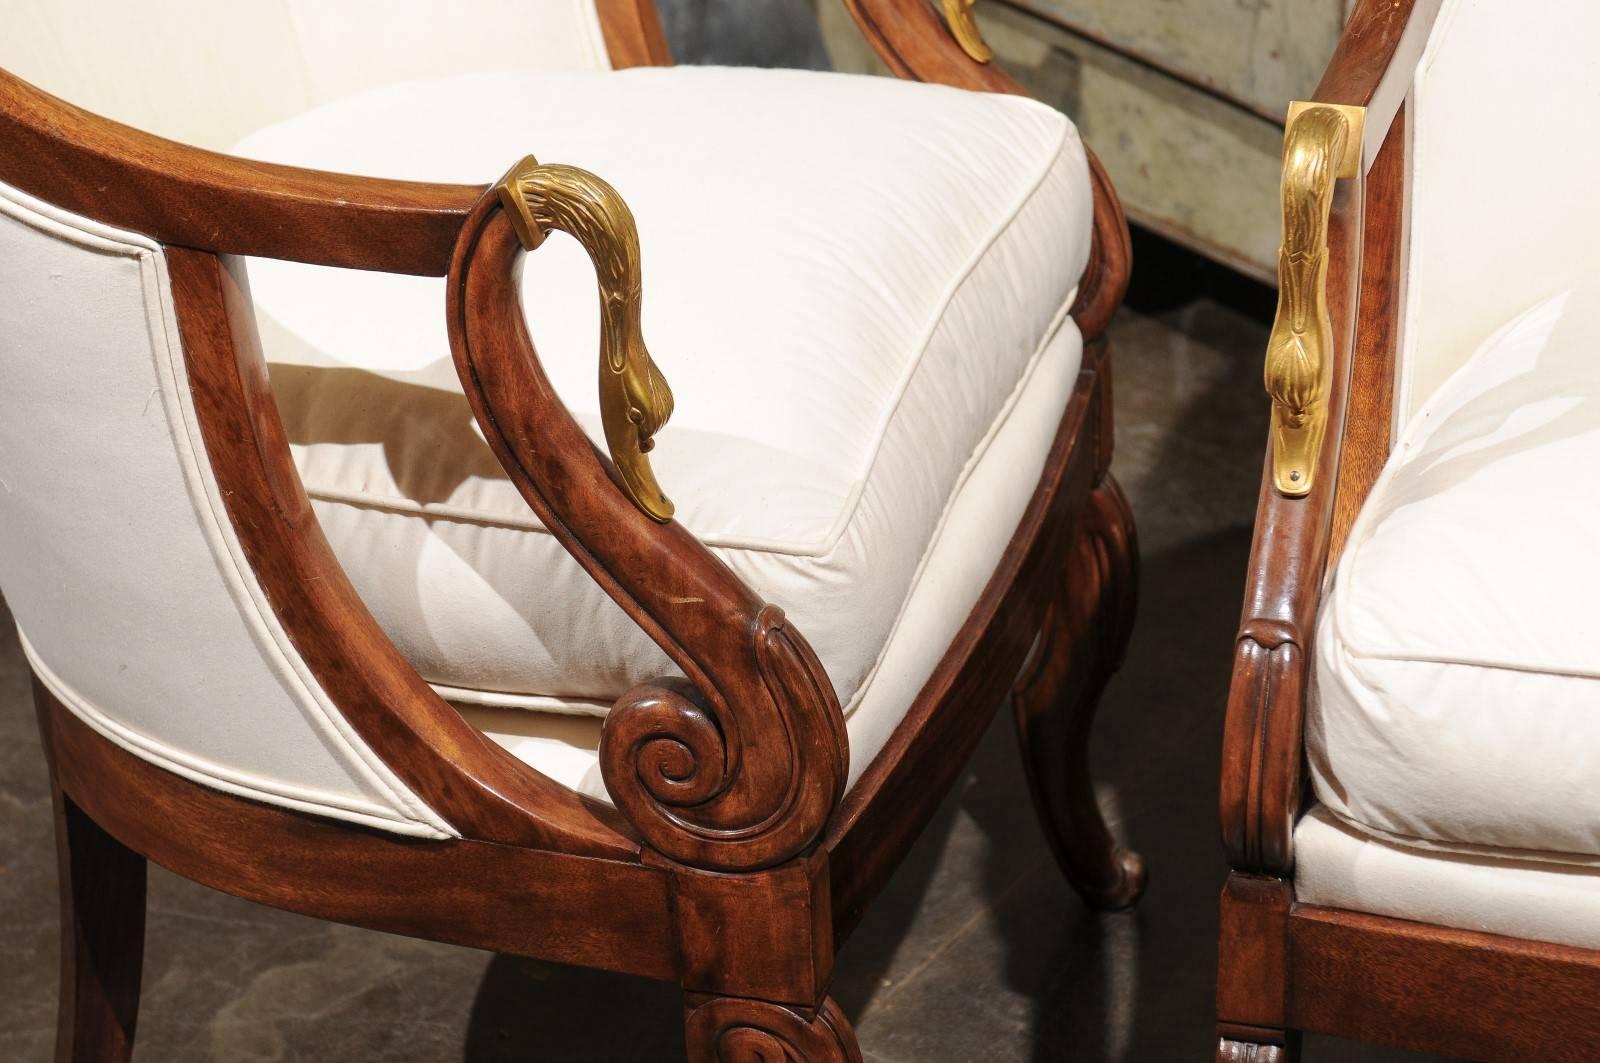 19th Century Pair of French Empire Style Tub Chairs with Brass Swan Motifs from the 1870s